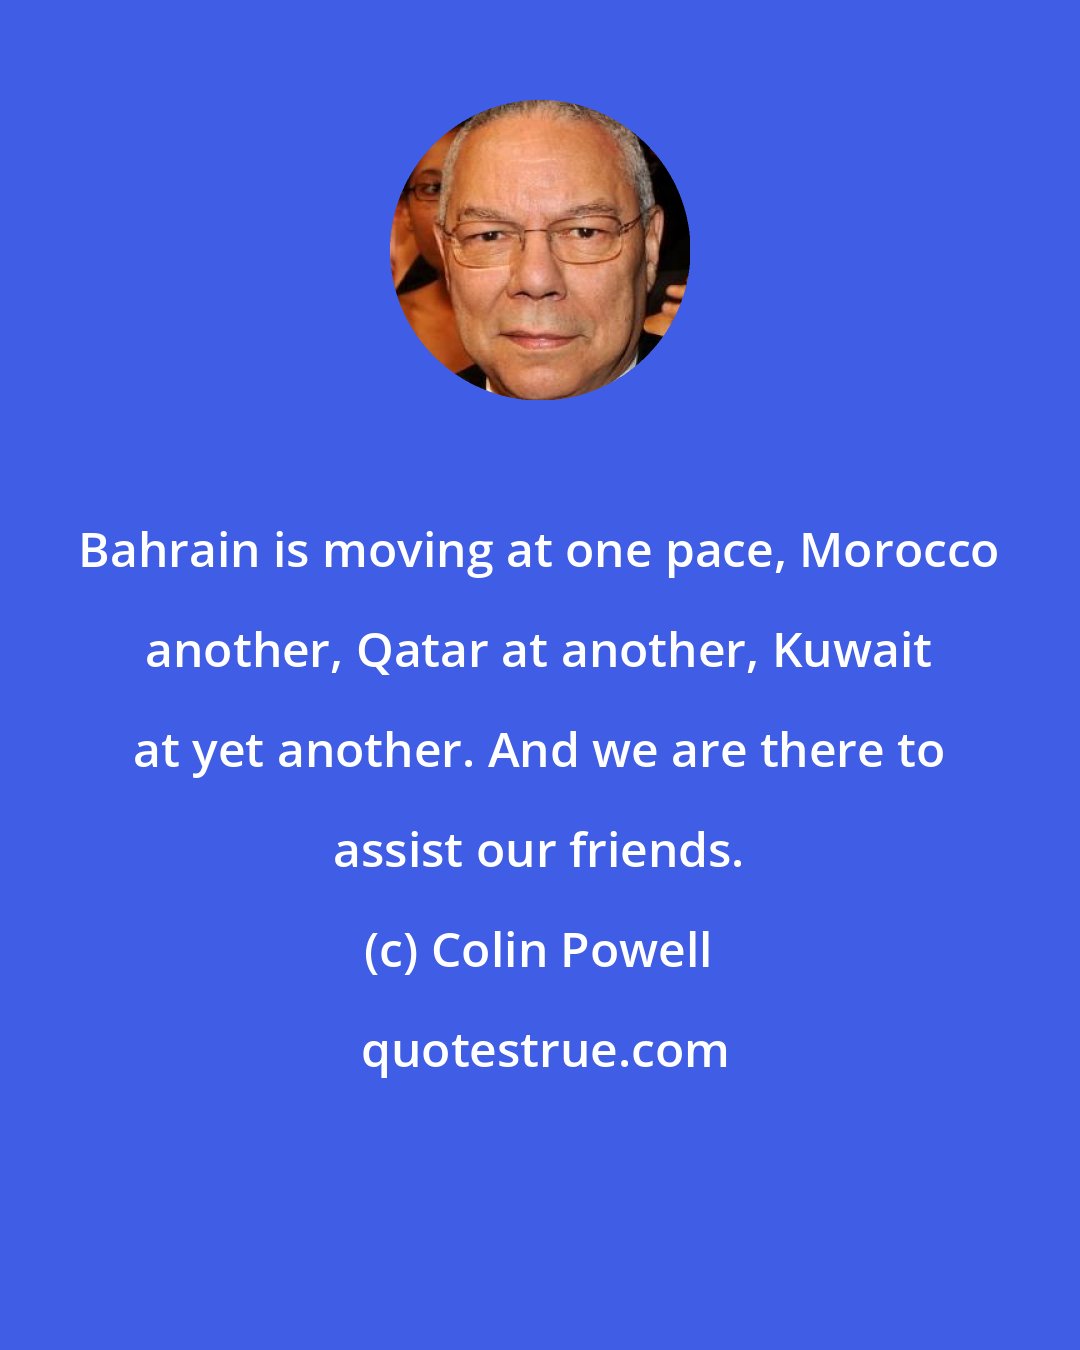 Colin Powell: Bahrain is moving at one pace, Morocco another, Qatar at another, Kuwait at yet another. And we are there to assist our friends.